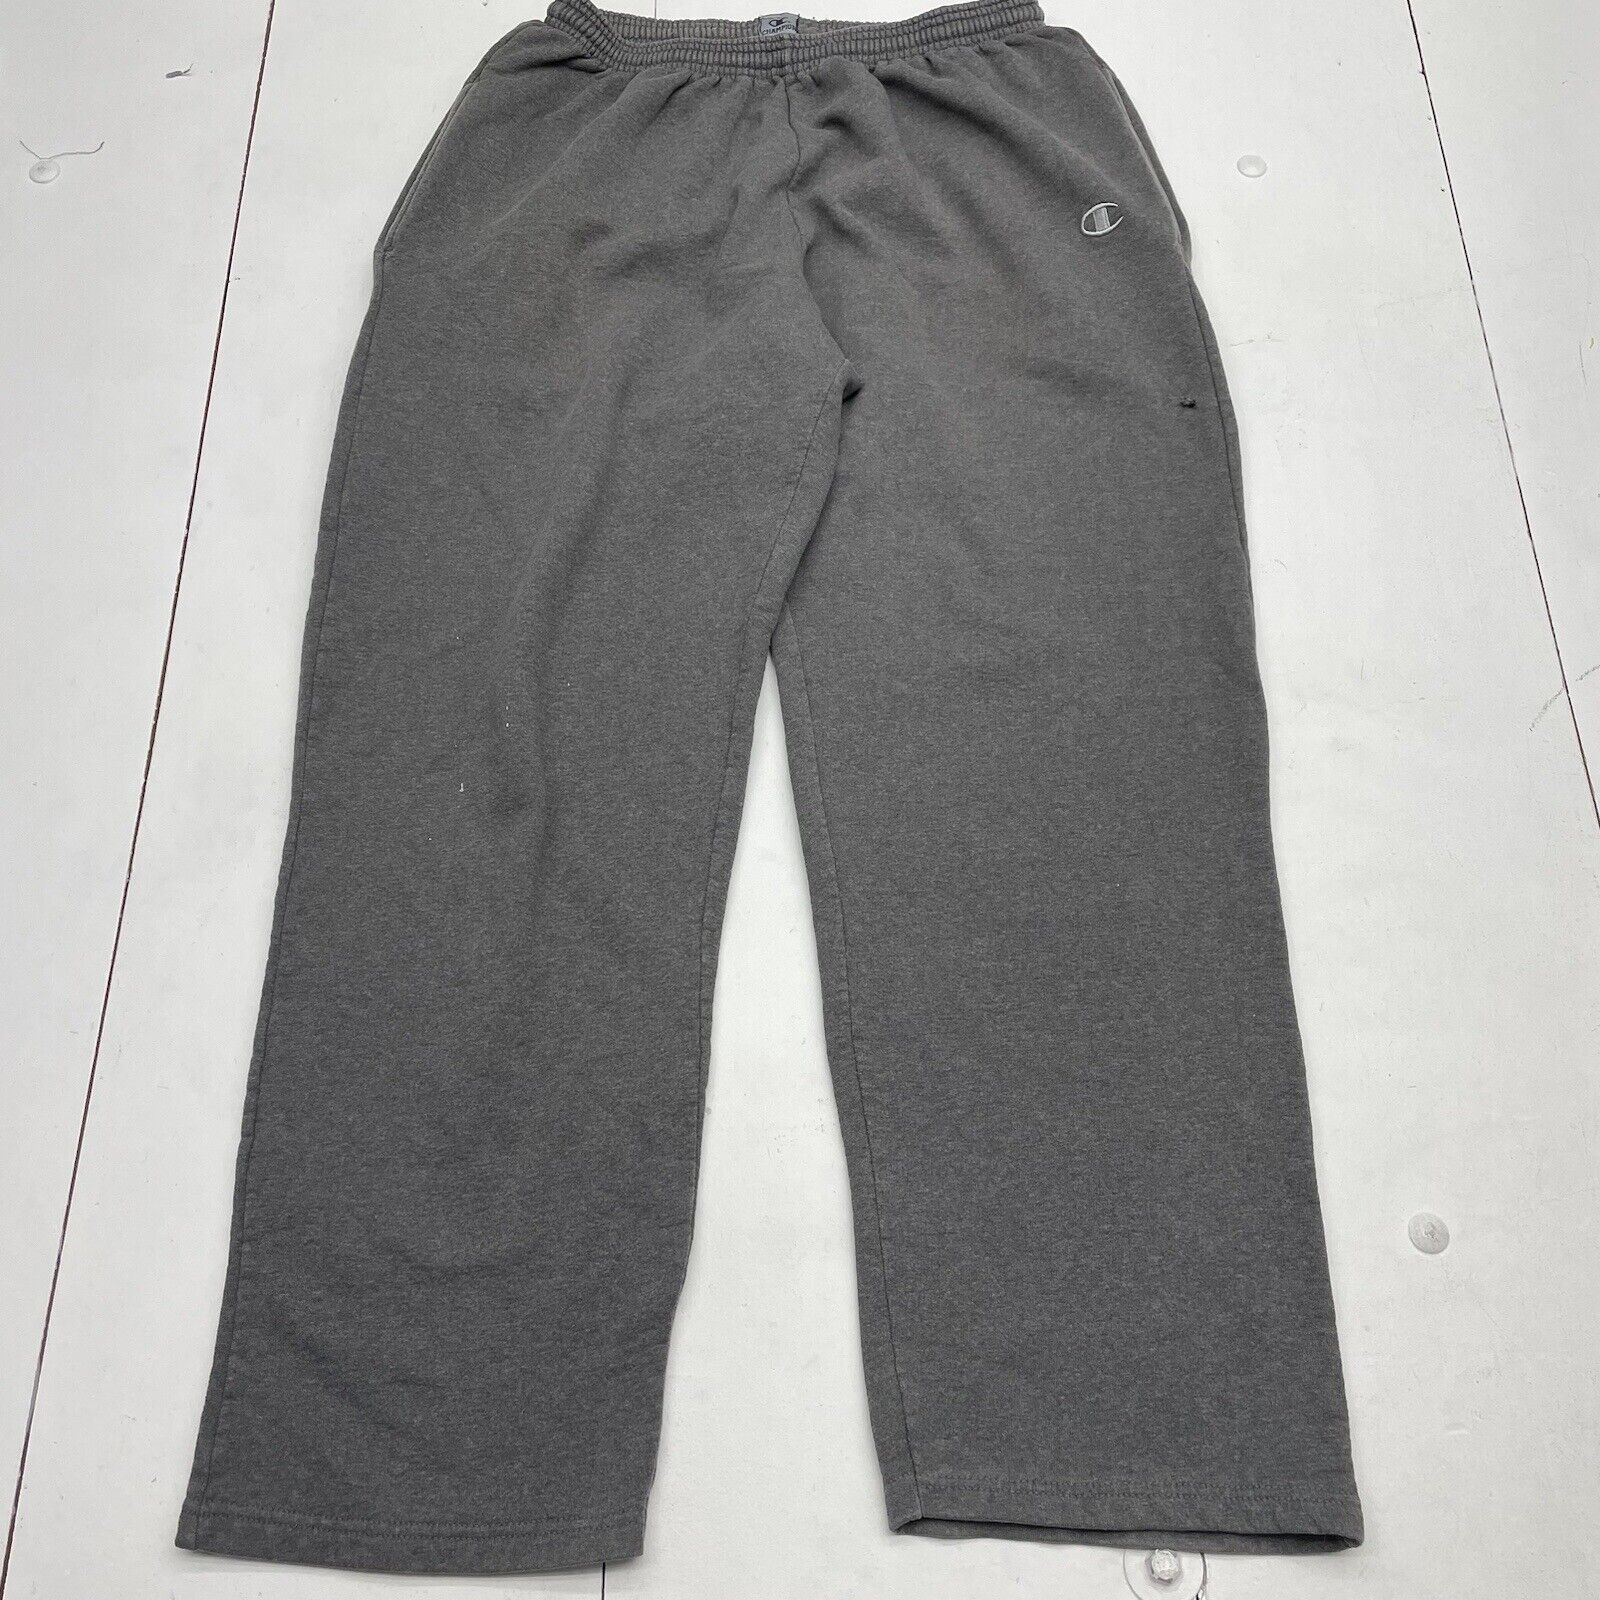 Champion Men's Double Dry Eco Open Bottom Sweatpants with Pockets 